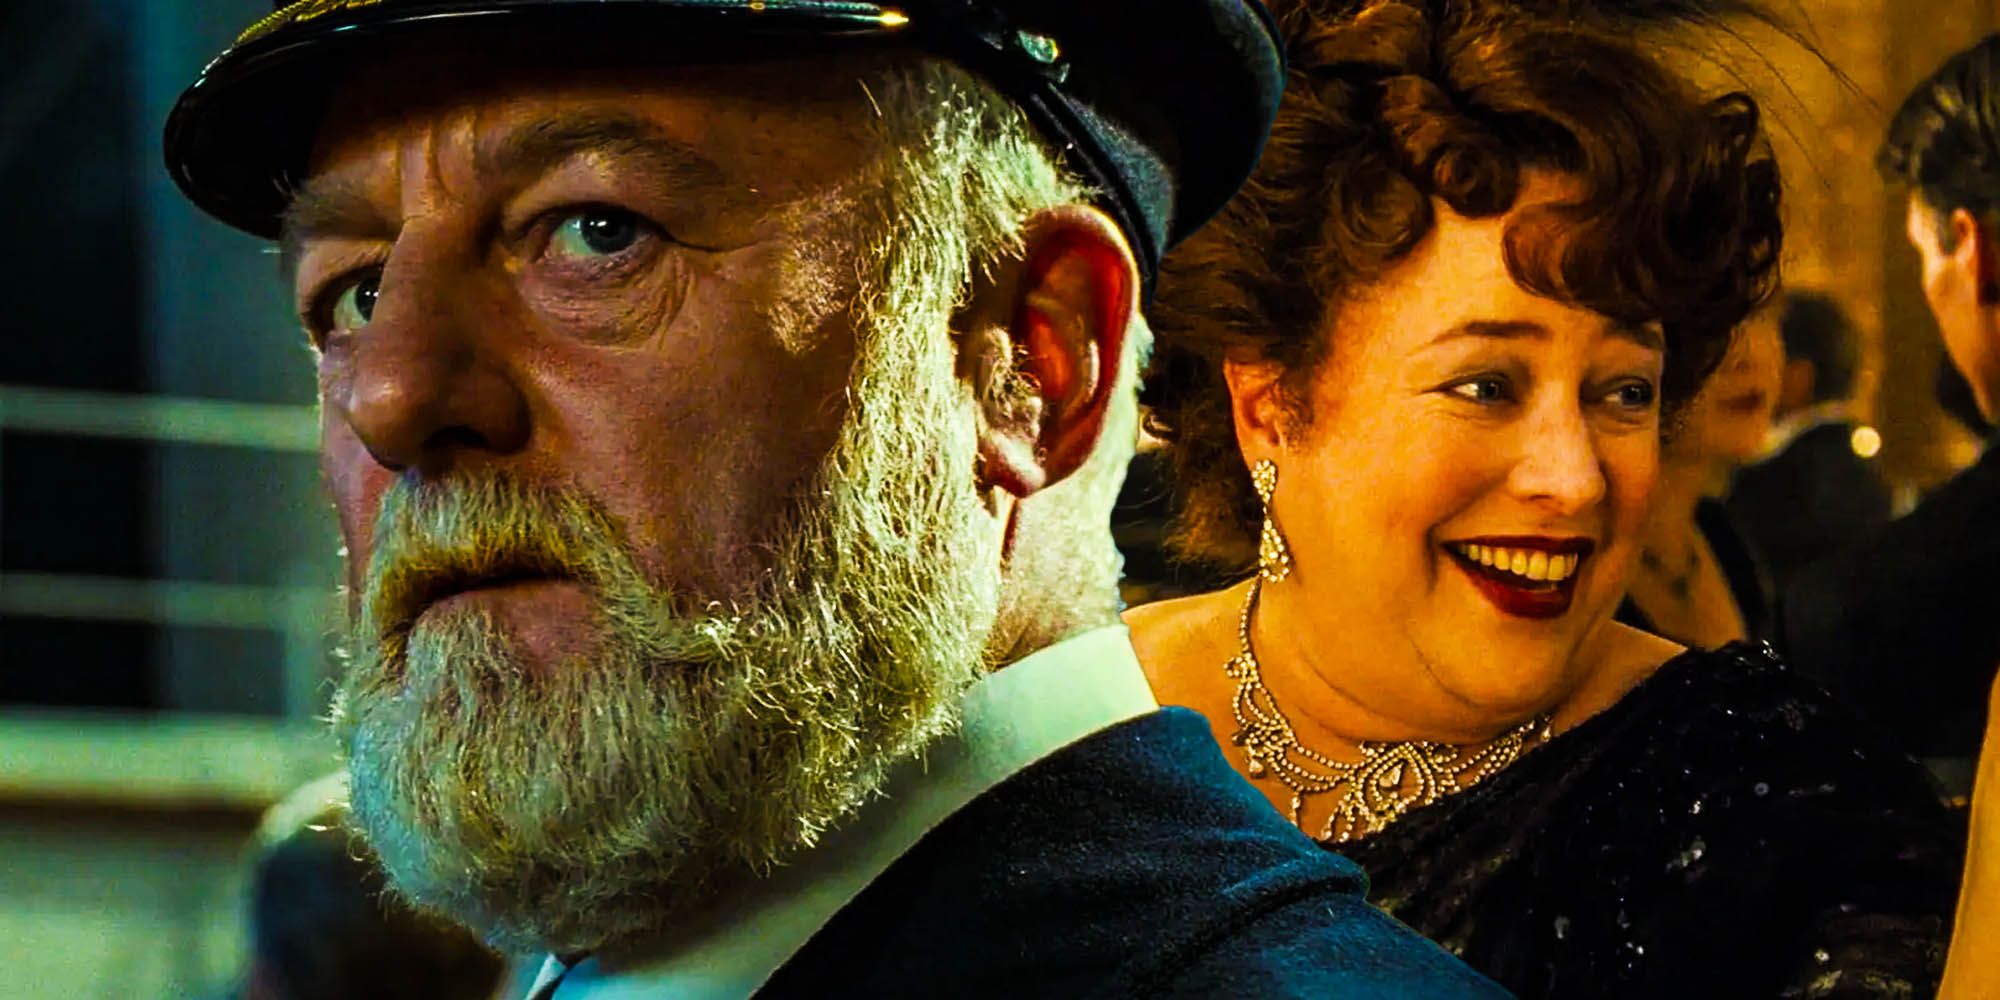 Captain Smith Molly Brown Kathy Bates from real life Titanic